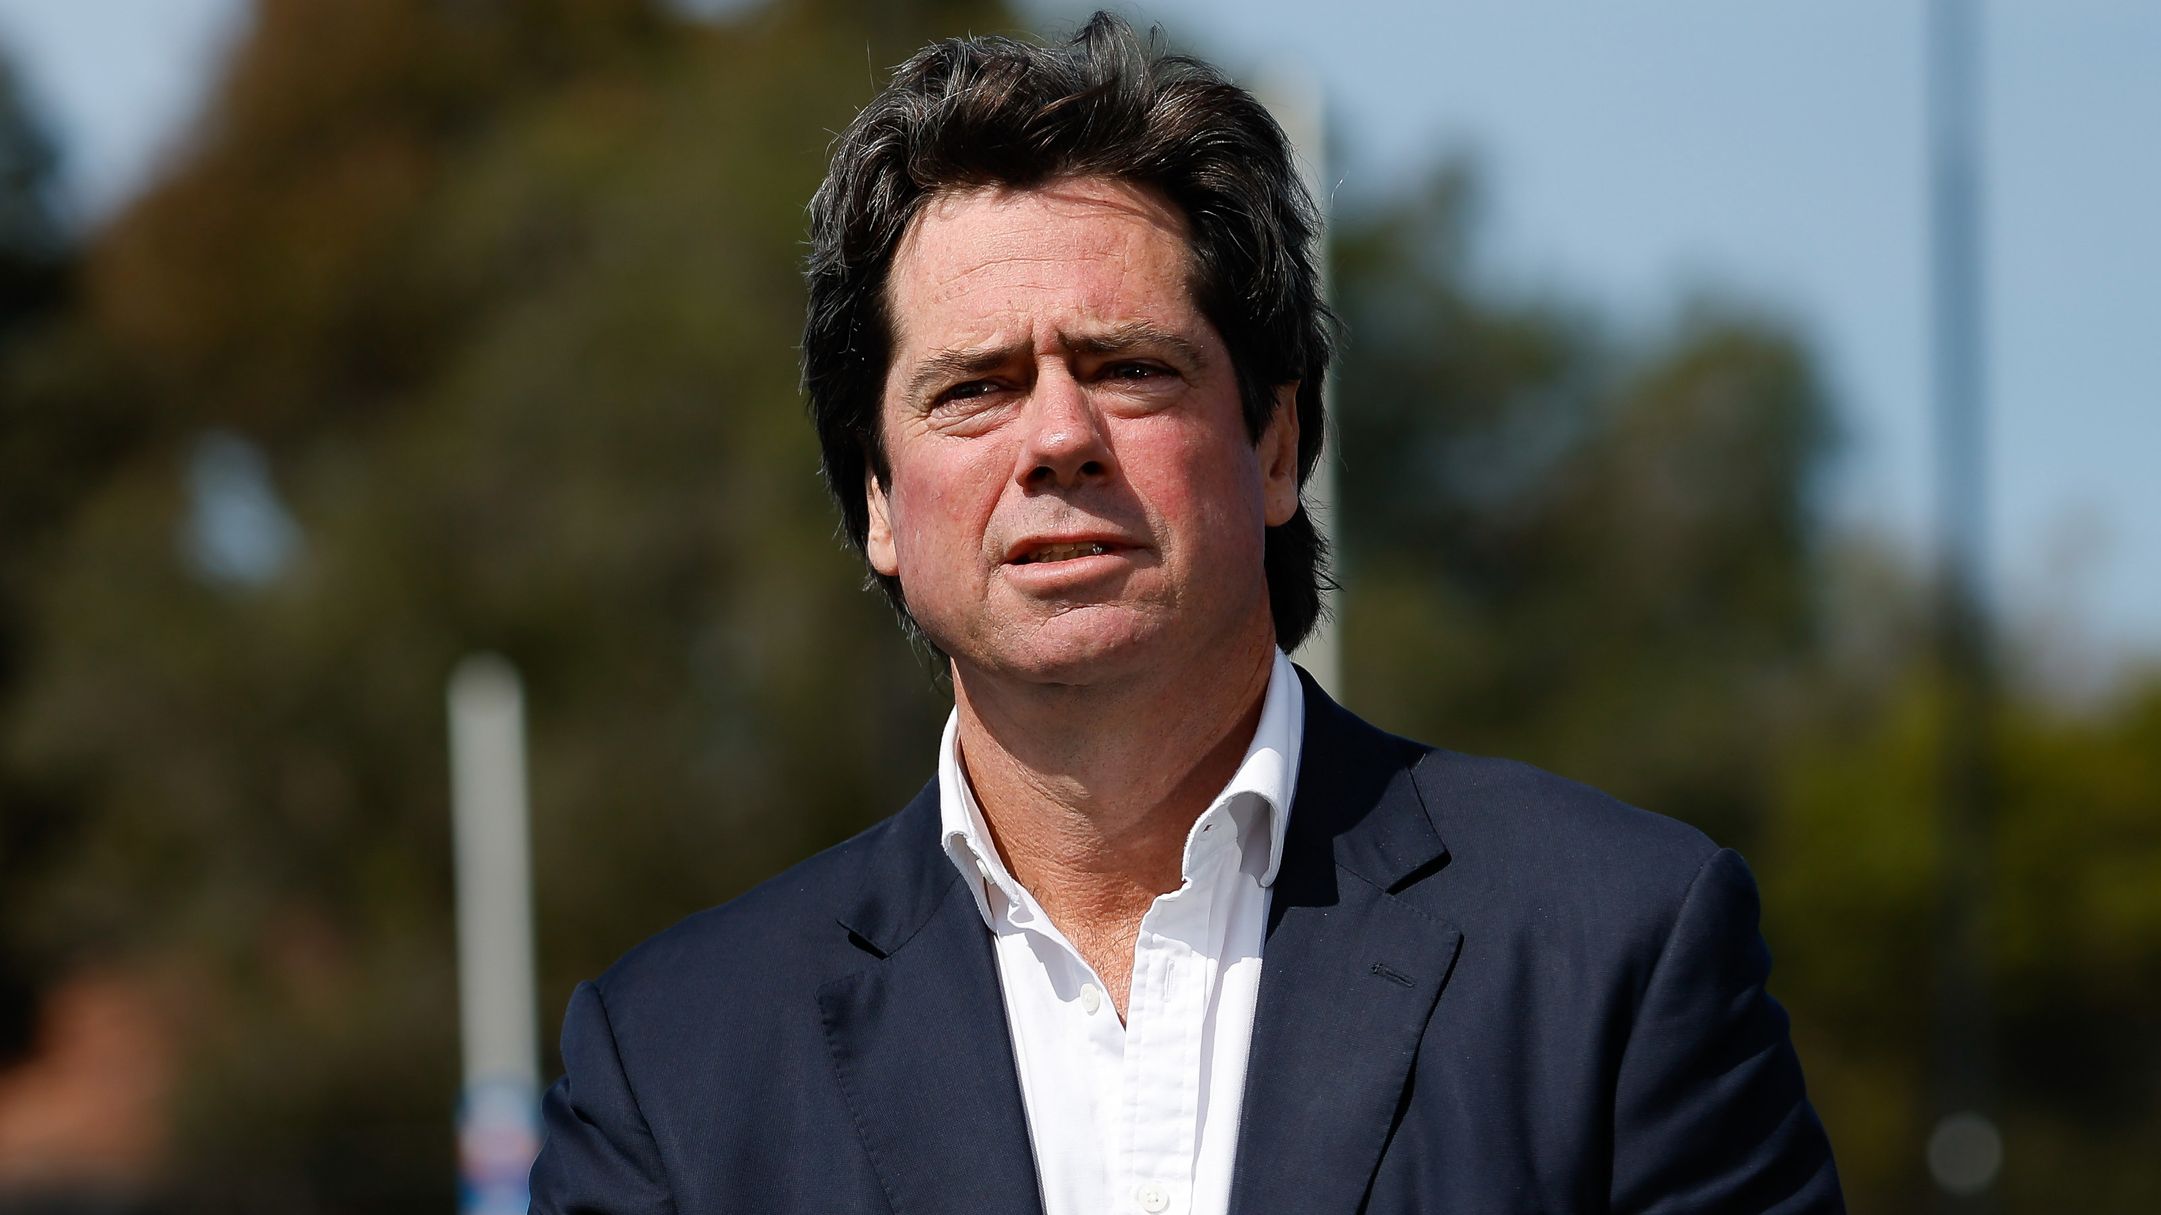 MELBOURNE, AUSTRALIA - SEPTEMBER 14: Gillon McLachlan, Chief Executive Officer of the AFL speaks to the media during the launch of the Telstra Footy Country Grants media opportunity at Yarraville Oval on September 14, 2023 in Melbourne, Australia. (Photo by Dylan Burns/AFL Photos via Getty Images)